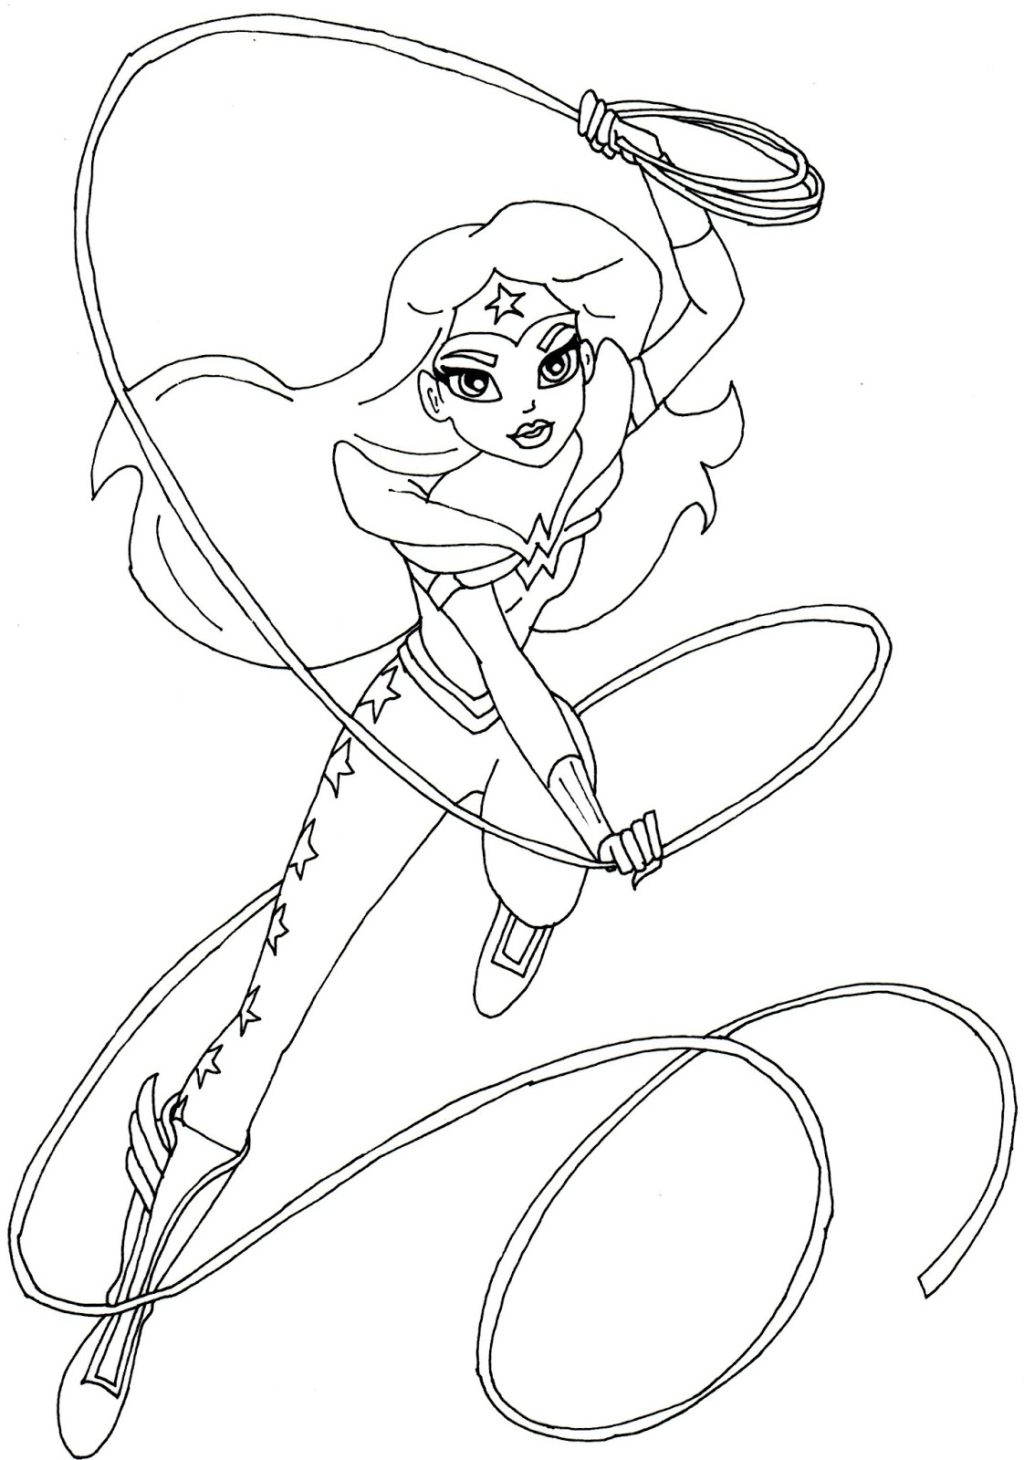 Coloring: 30 Remarkable Dc Superhero Girls Coloring Pages. Dc ...